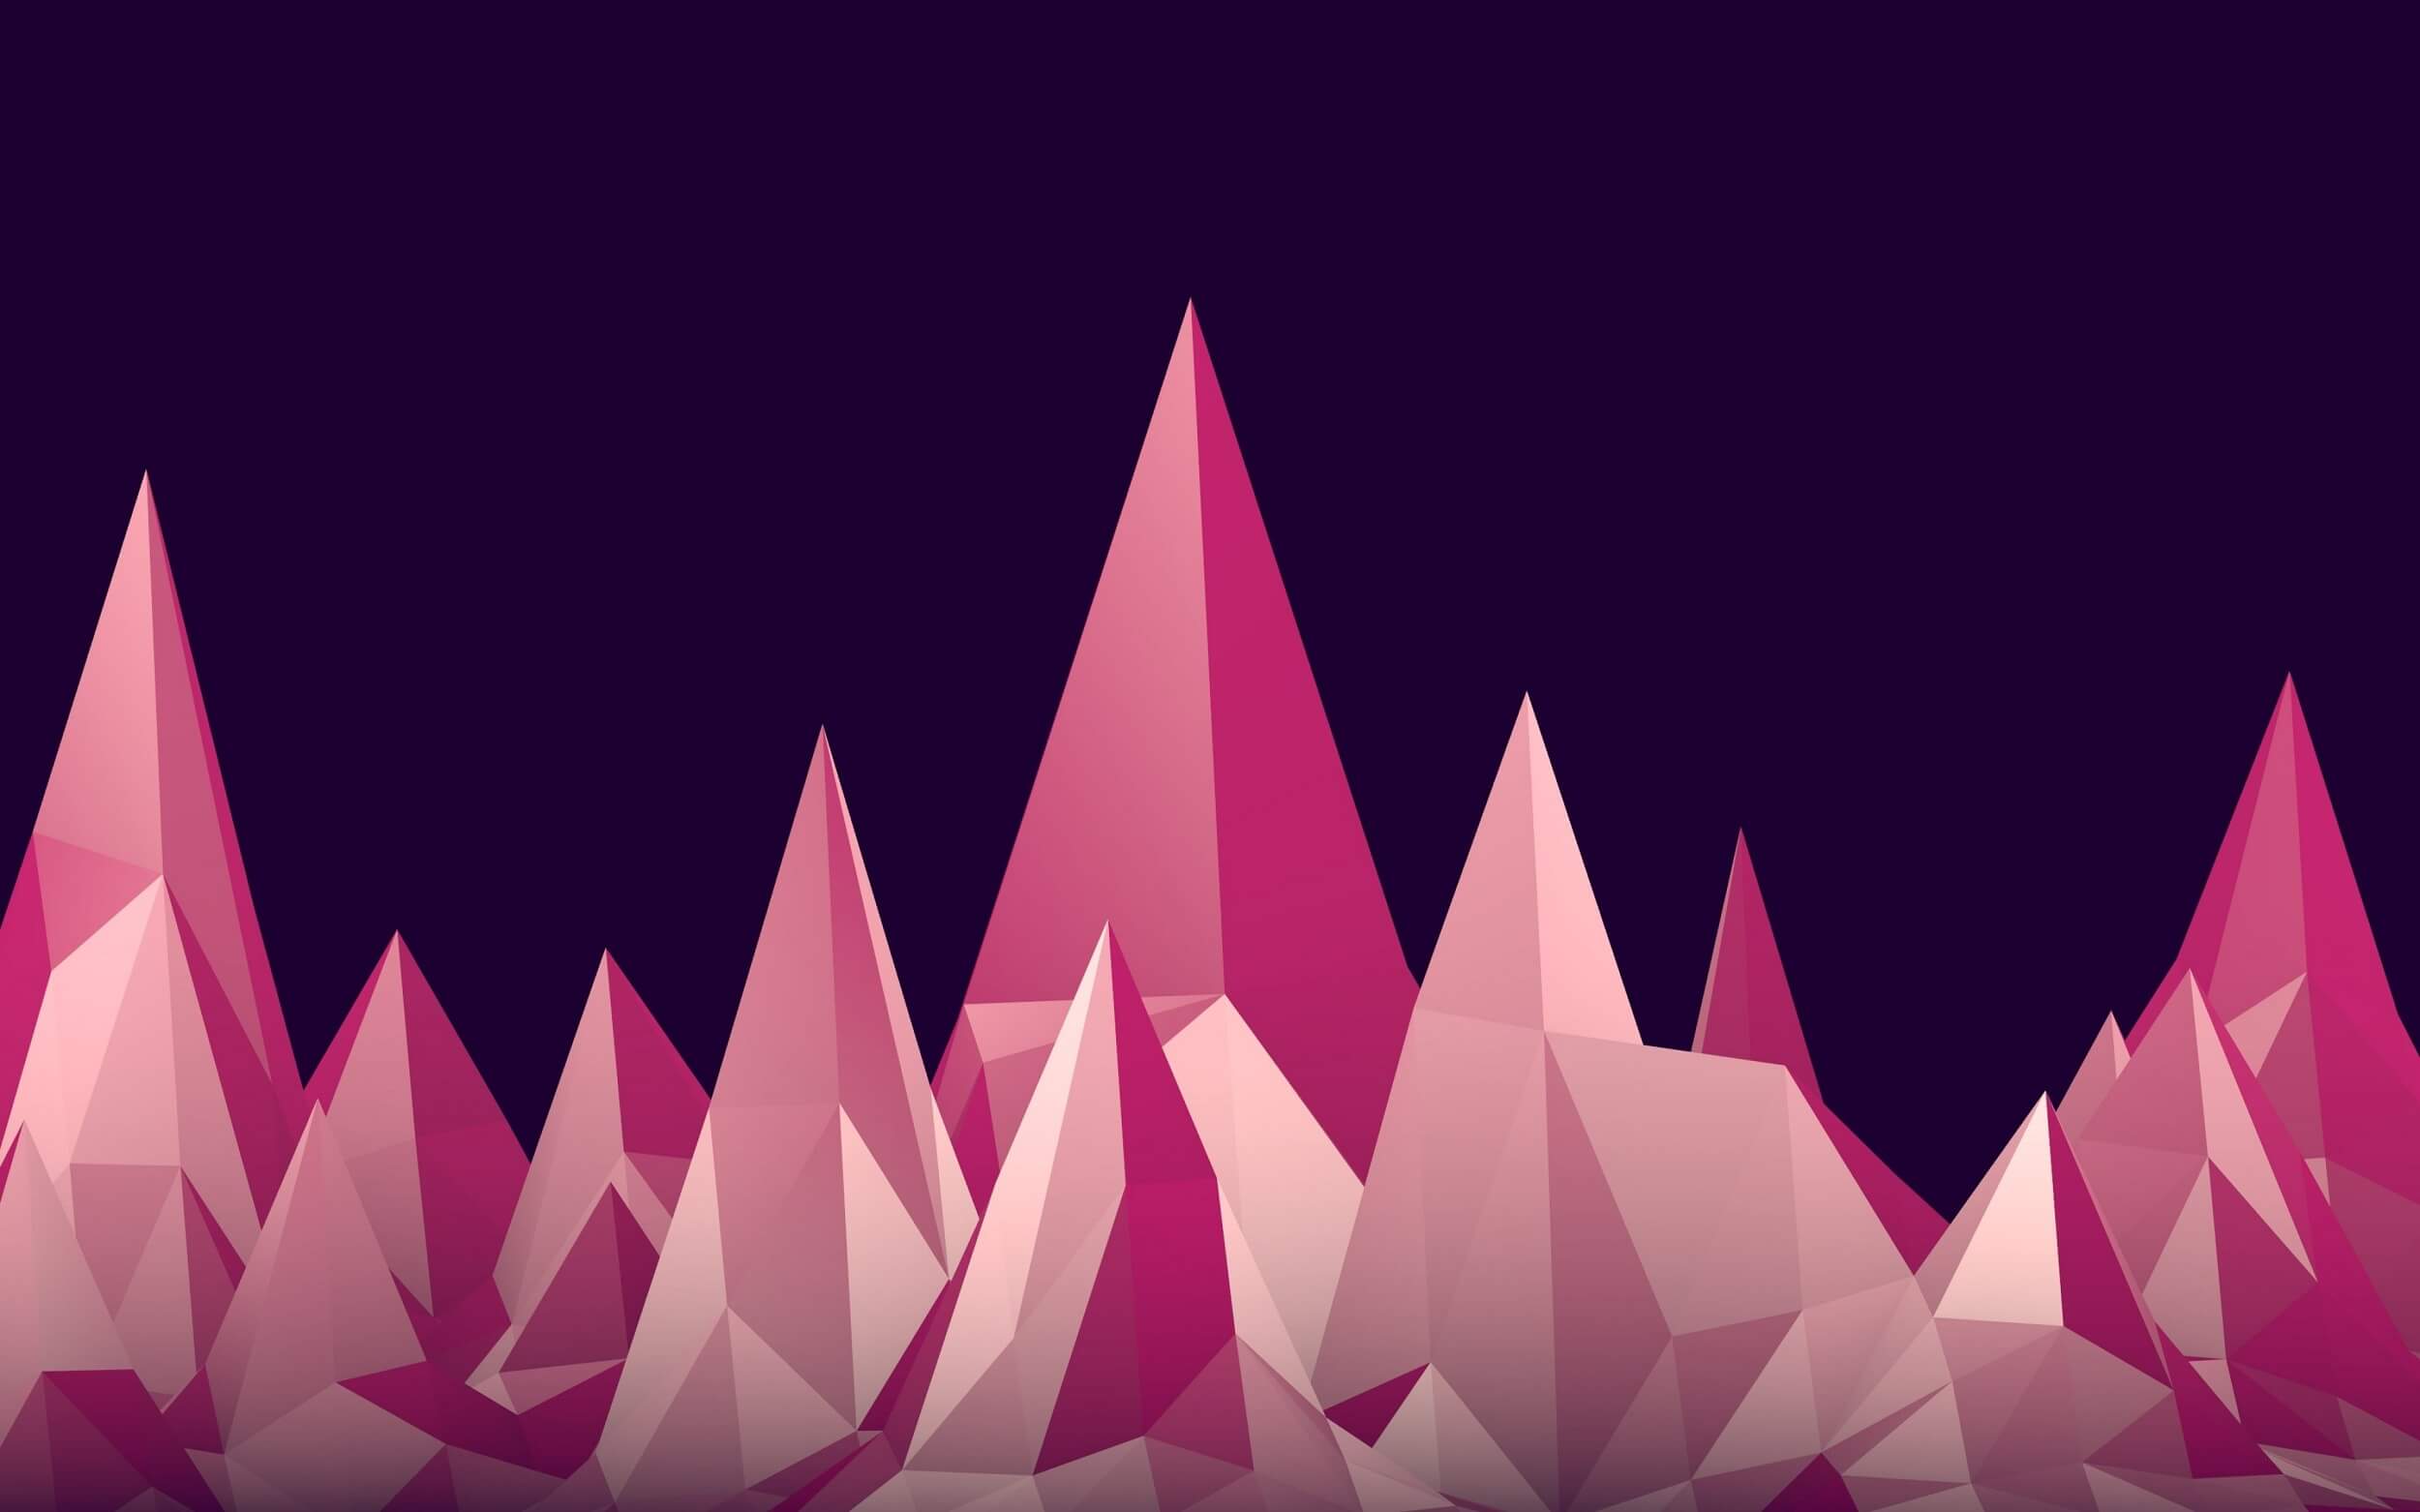 Low Poly Art Wallpapers